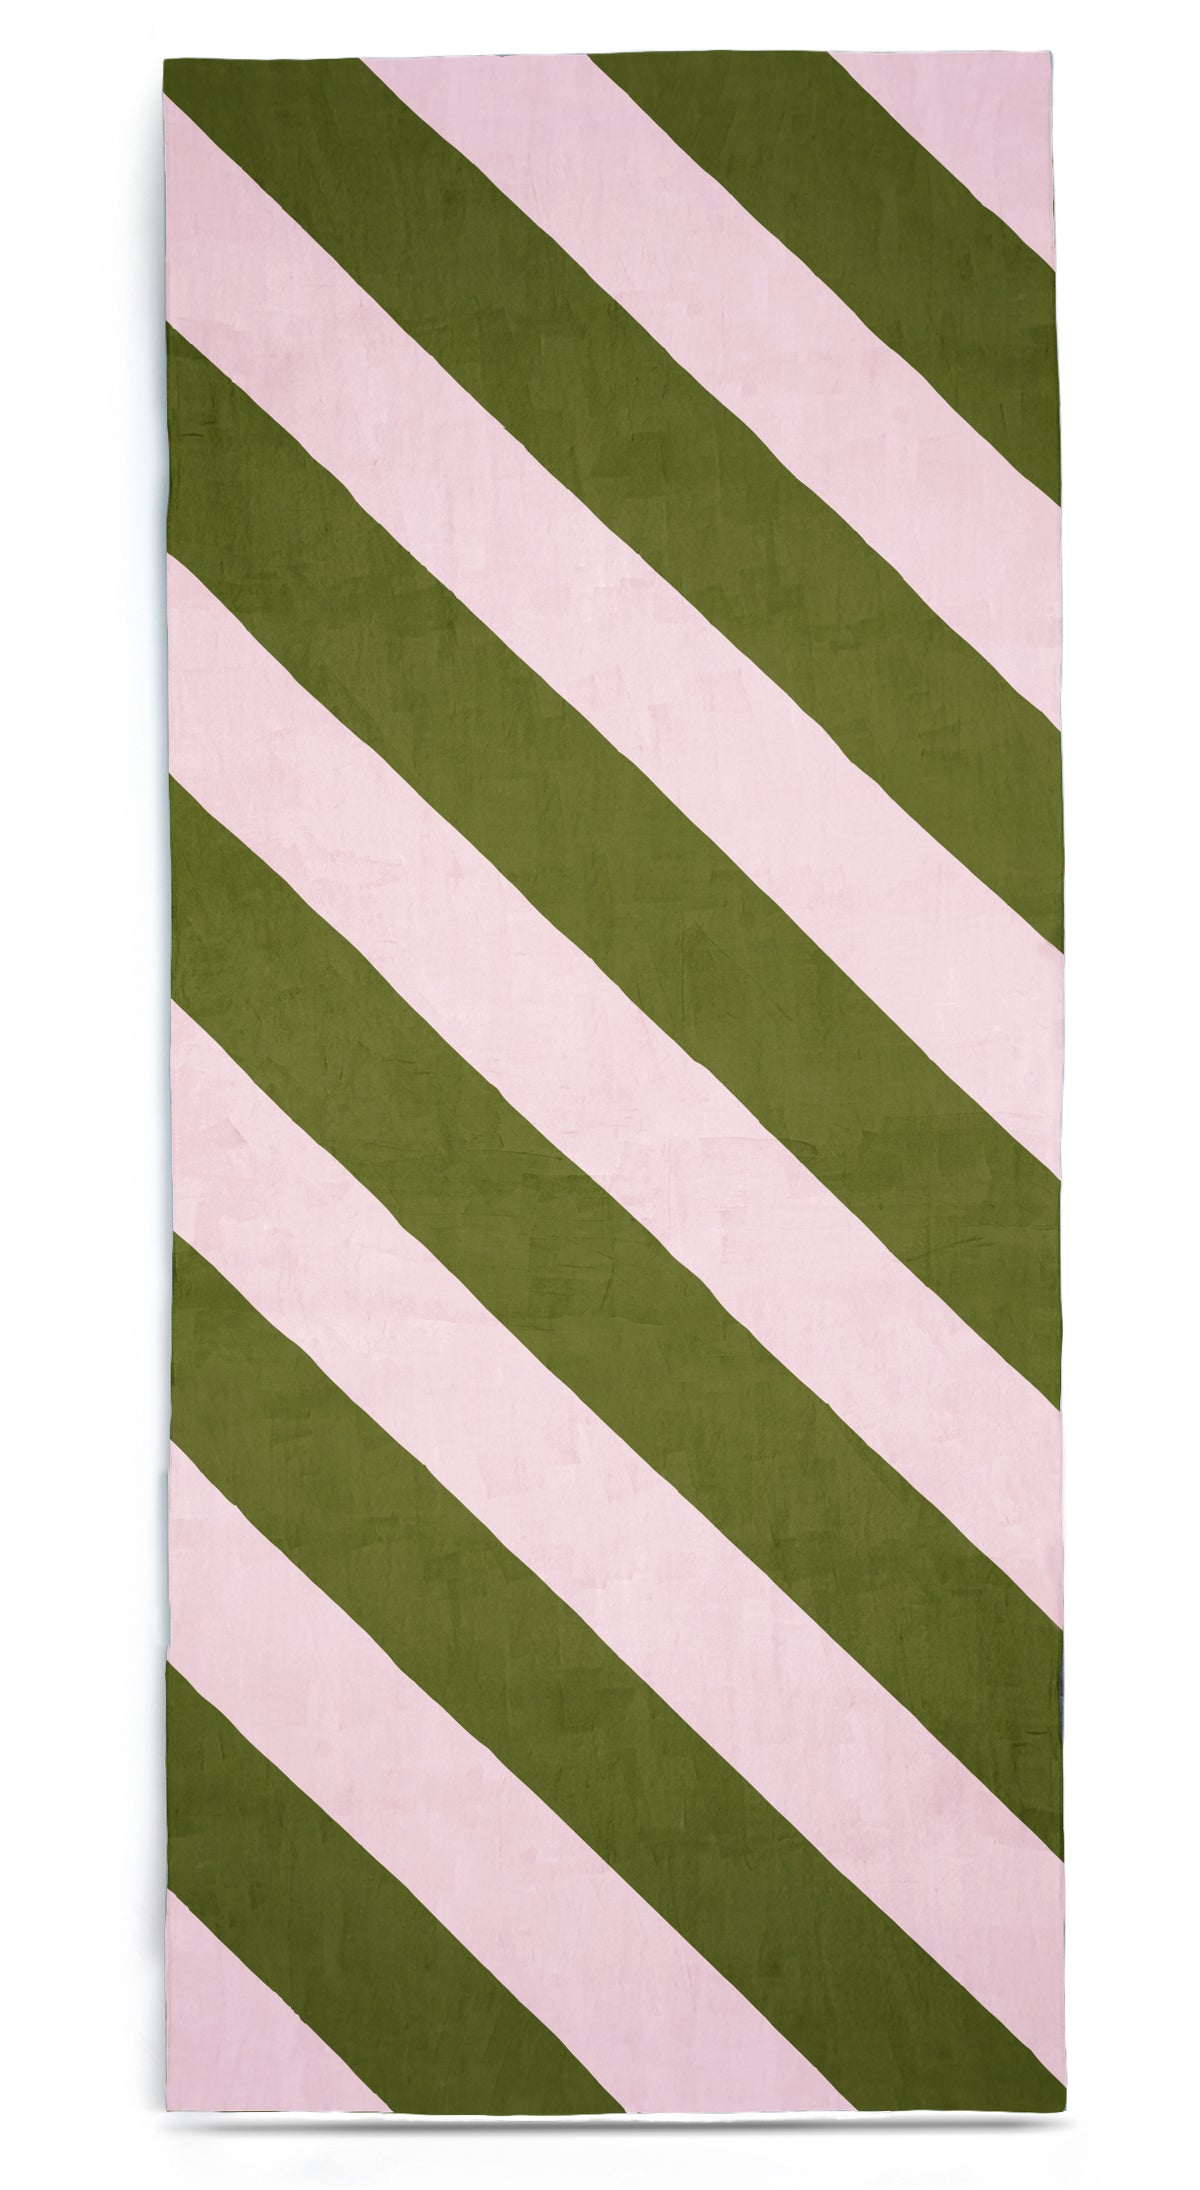 Stripe Linen Tablecloth in Avocado Green and Pale Pink